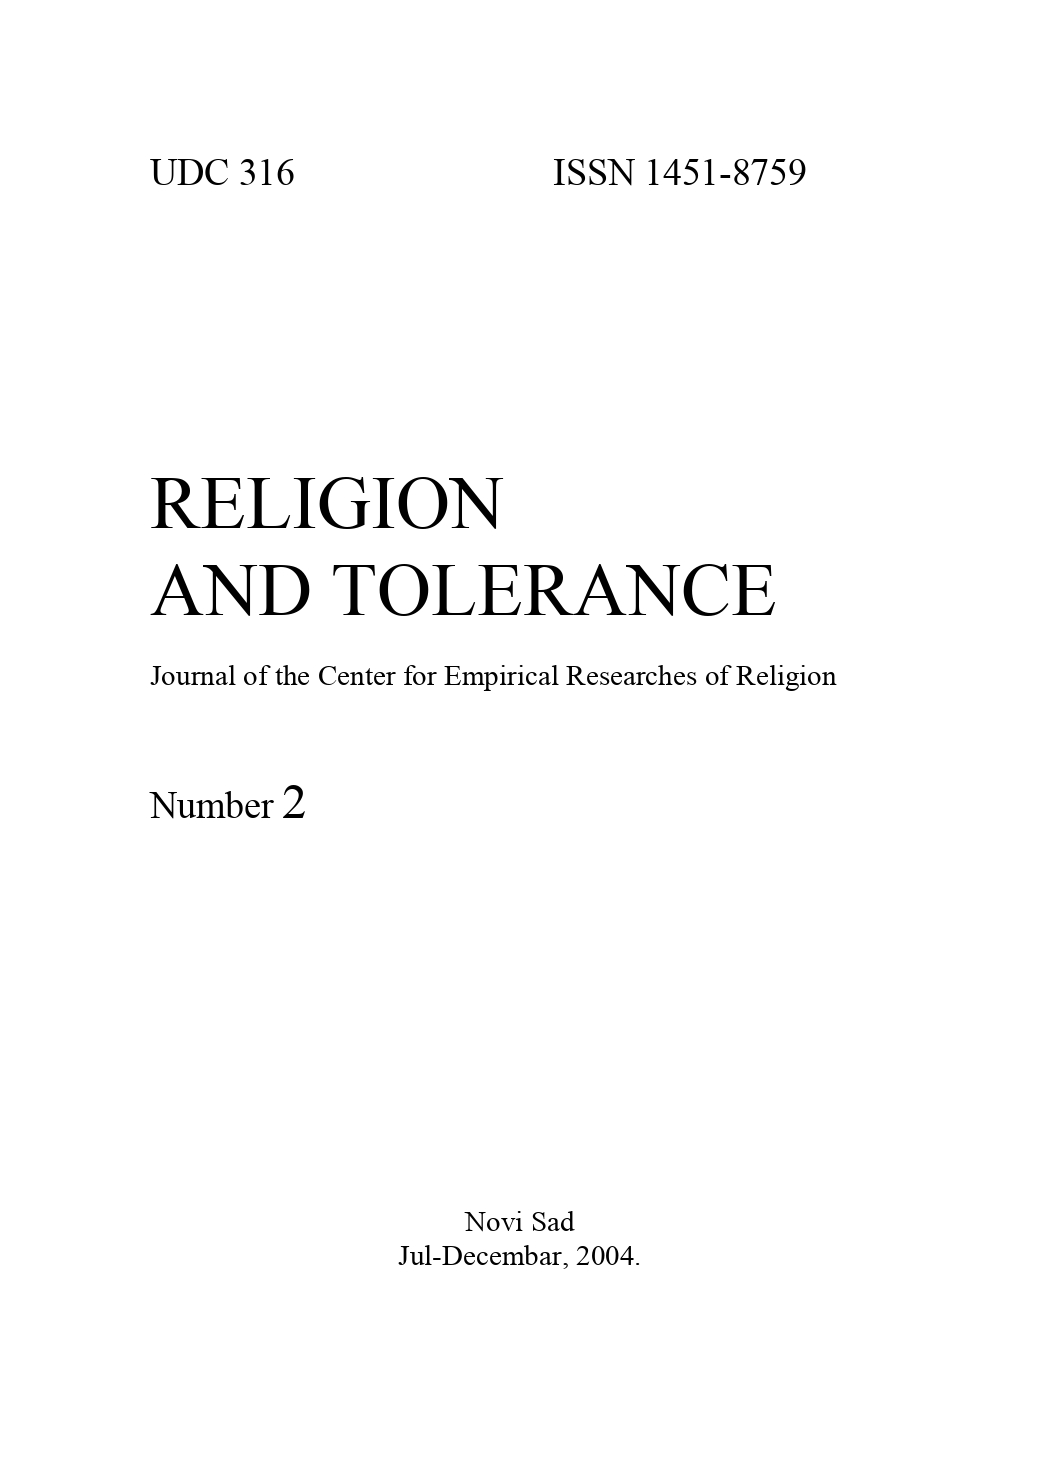 CONTENTS OF THE FIRST ISSUE OF THE JOURNAL RELIGION AND TOLERANCE Cover Image